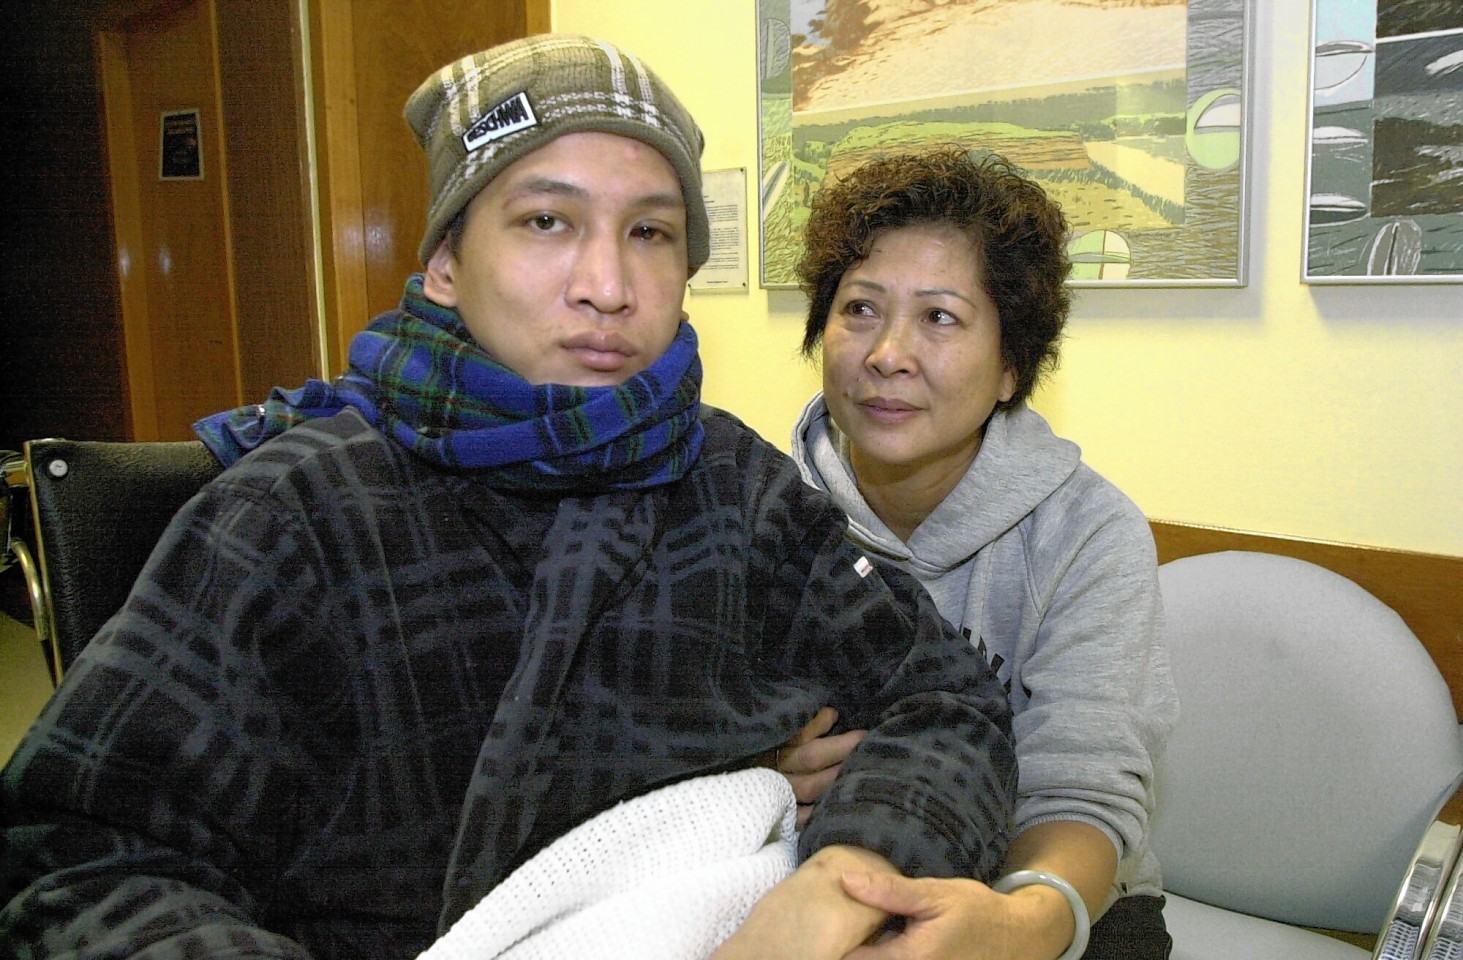 Terry Ho with his mum Yuk Yingleung recovering in ARI.